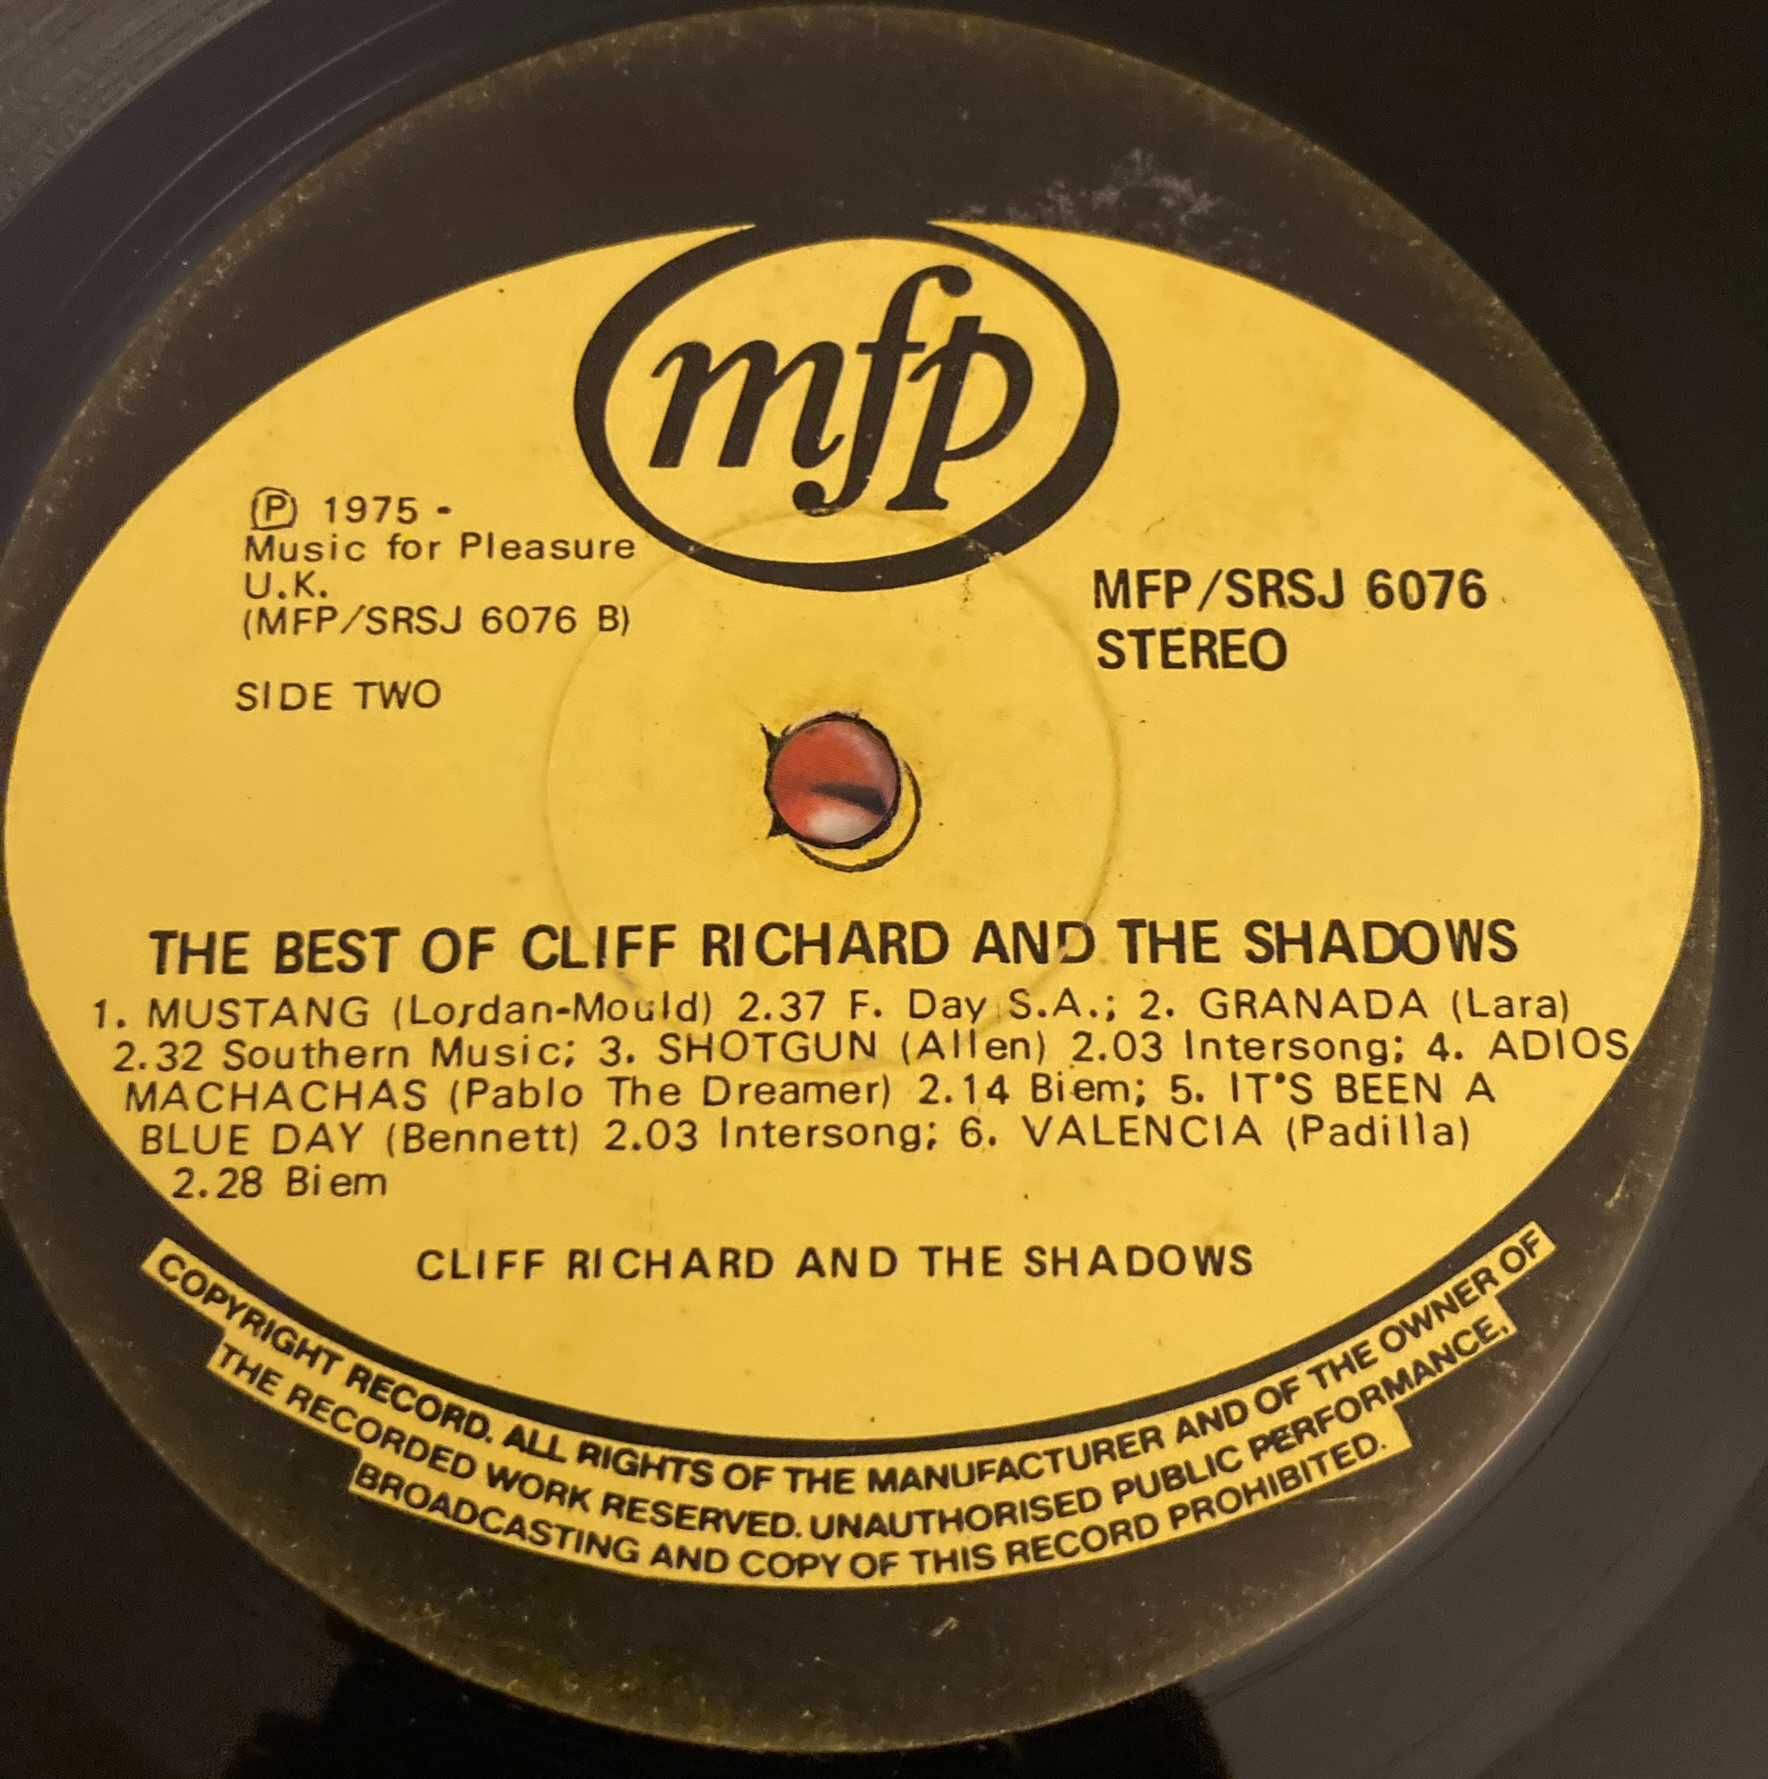 The Best of Cliff Richards and The Shadows (Disco Vinil LP 33RPM)